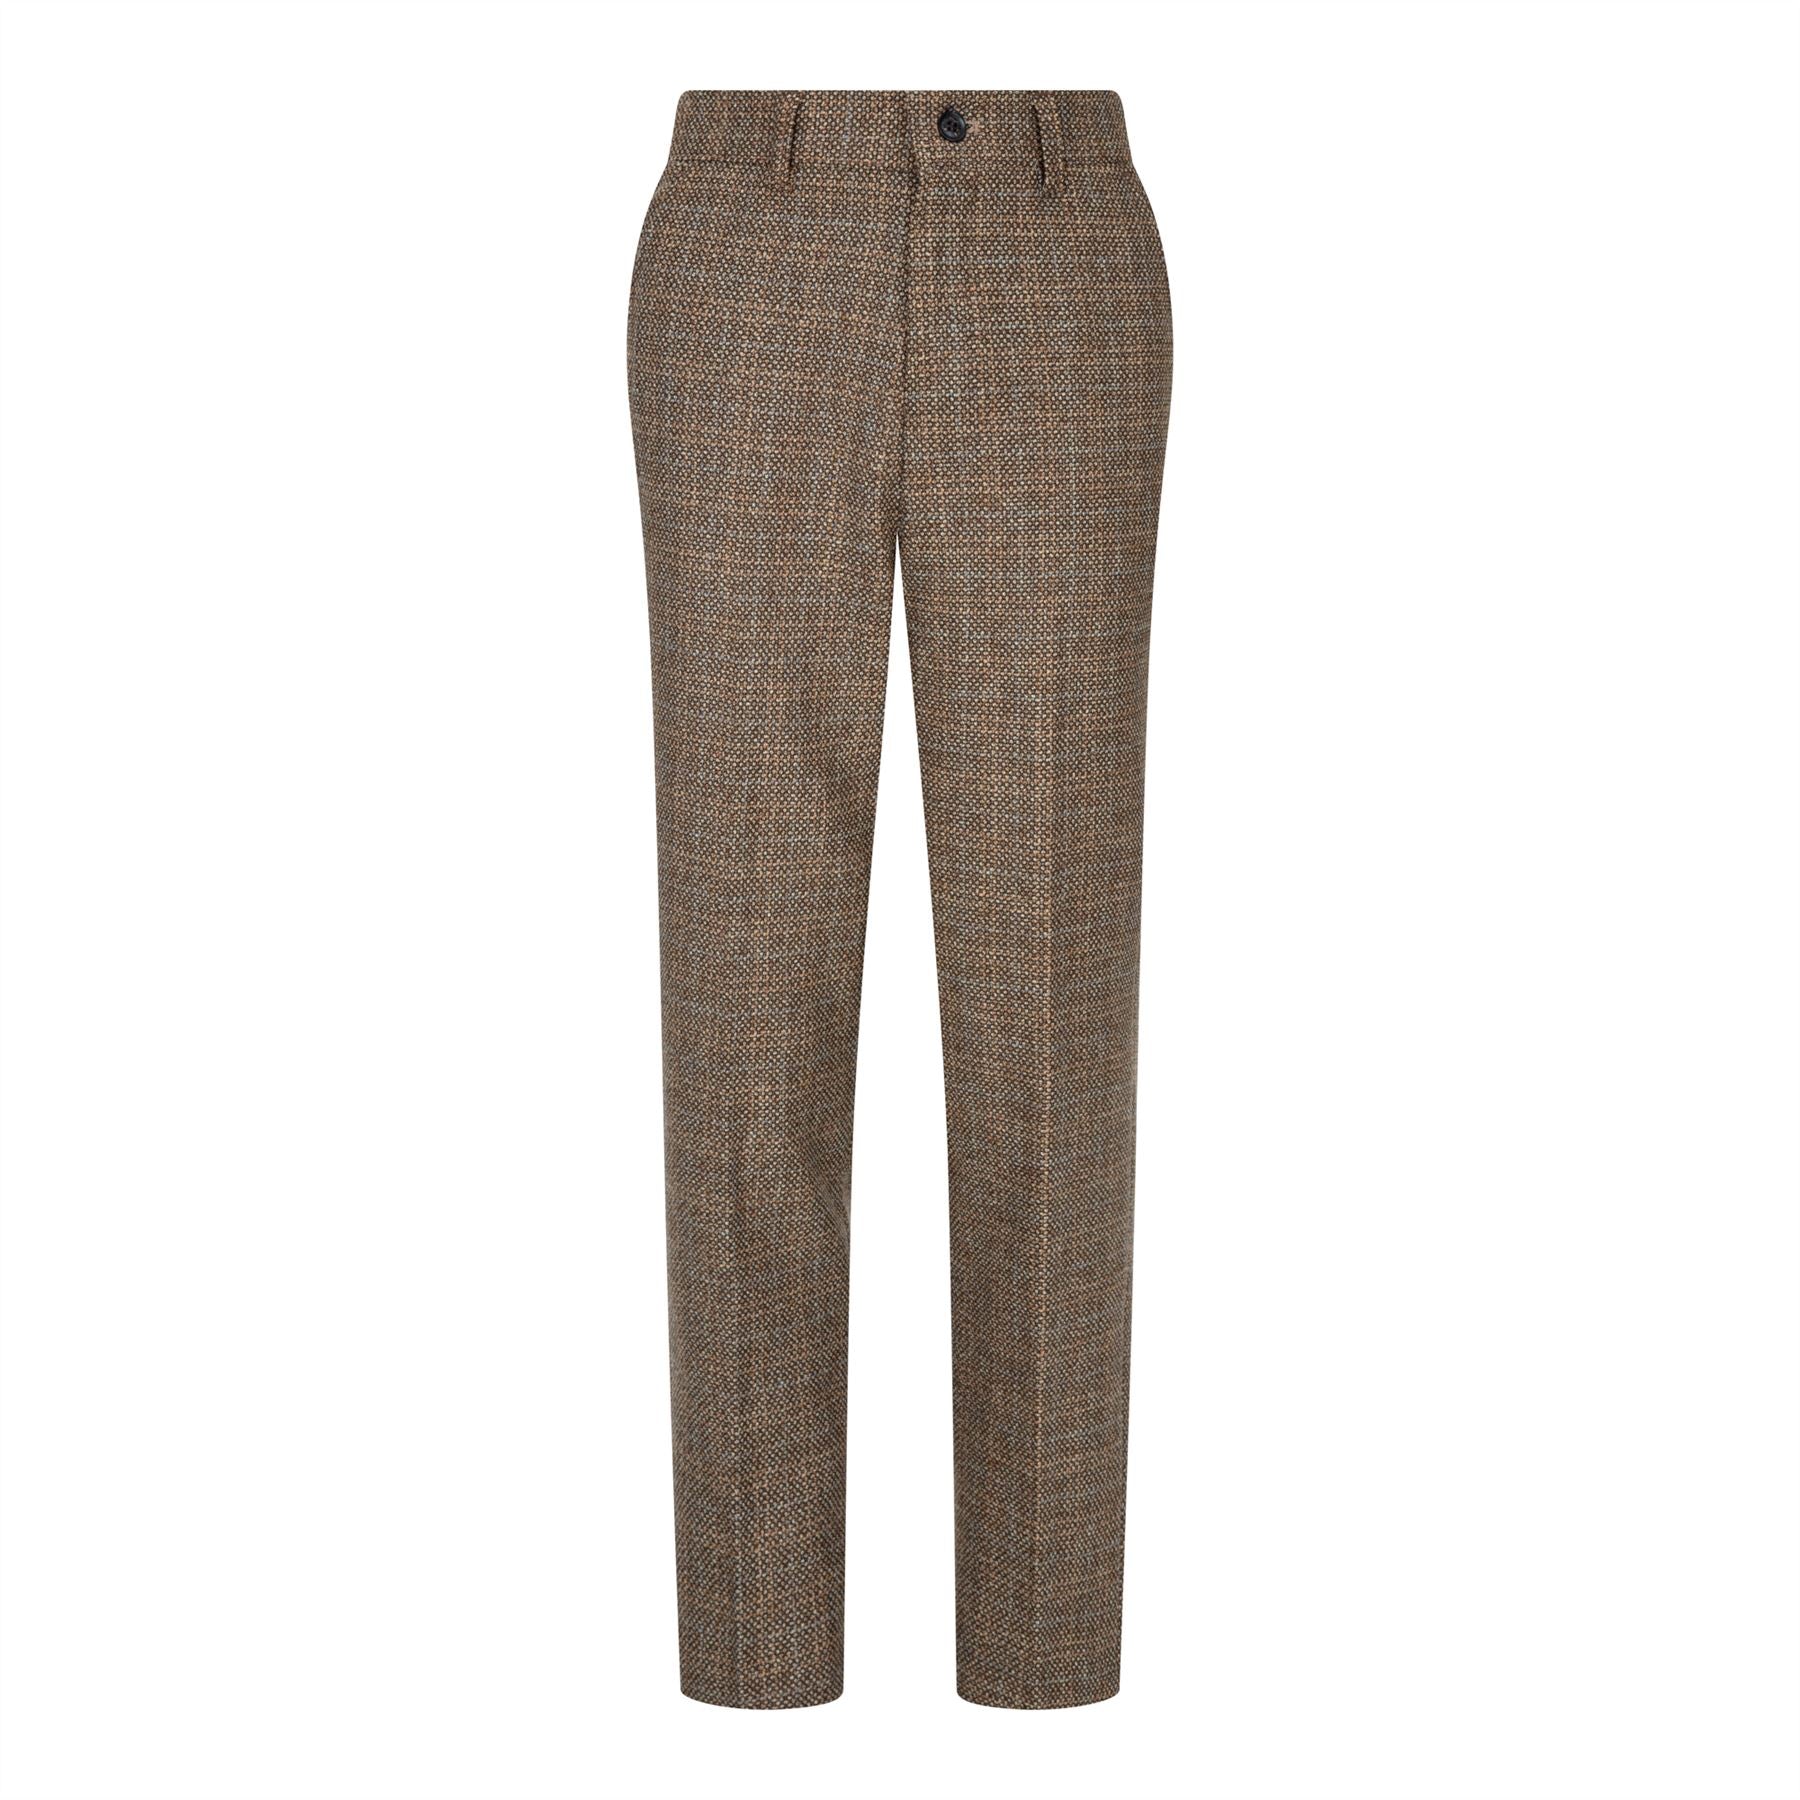 Boys 3 Piece Brown Suit Tweed Check Vintage Retro Tailored Fit 1920s ...